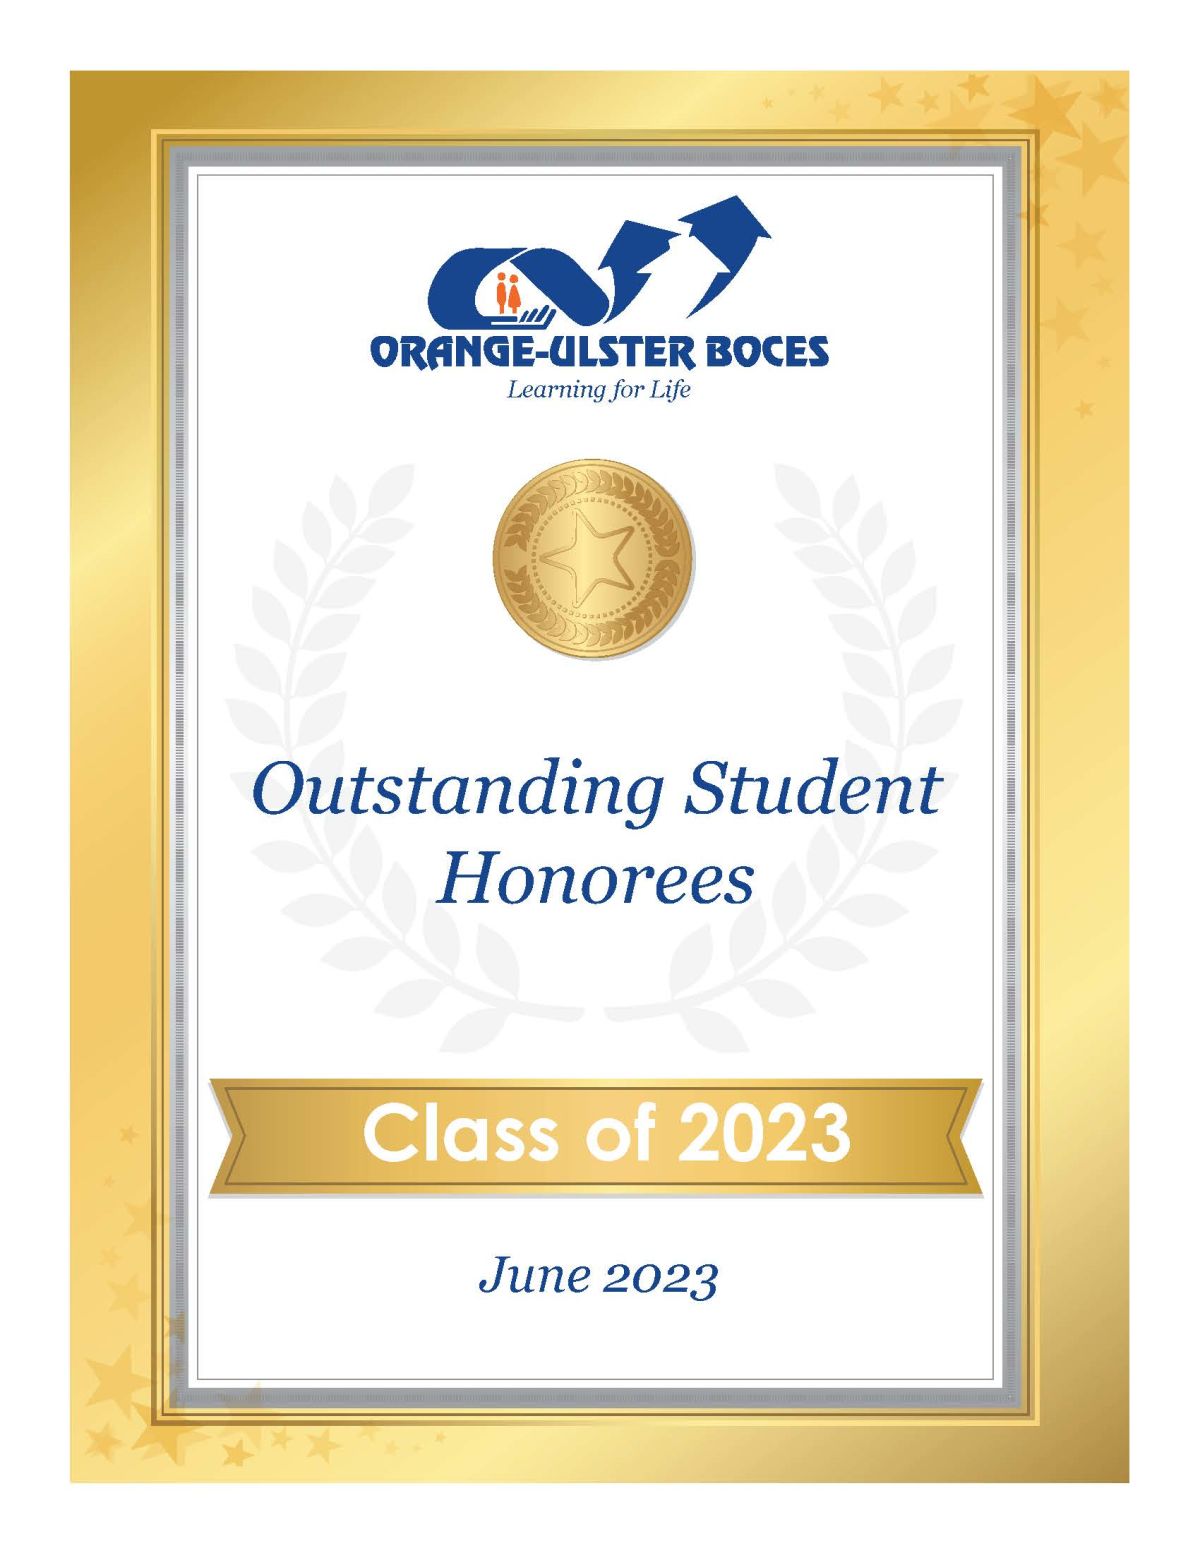 Orange-Ulster BOCES 2023 Outstanding Student Awards News and Social Media Details